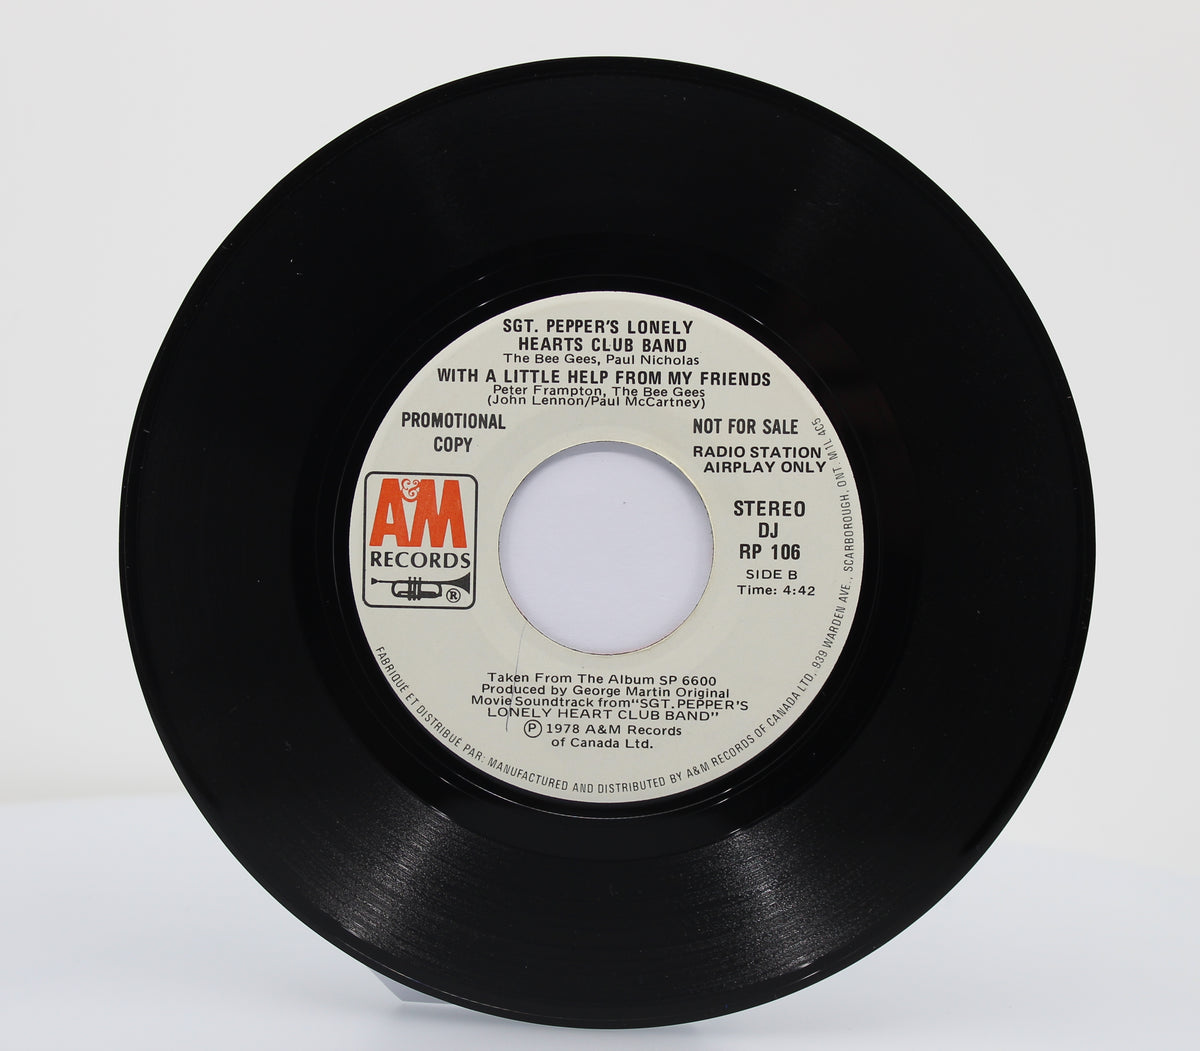 Bee Gees, Paul Nicholas, Peter Frampton ‎– Sgt. Pepper&#39;s Lonely Hearts Club Band, Vinyl 7&quot; (45rpm) PROMO, Canada 1978  (s 1217)